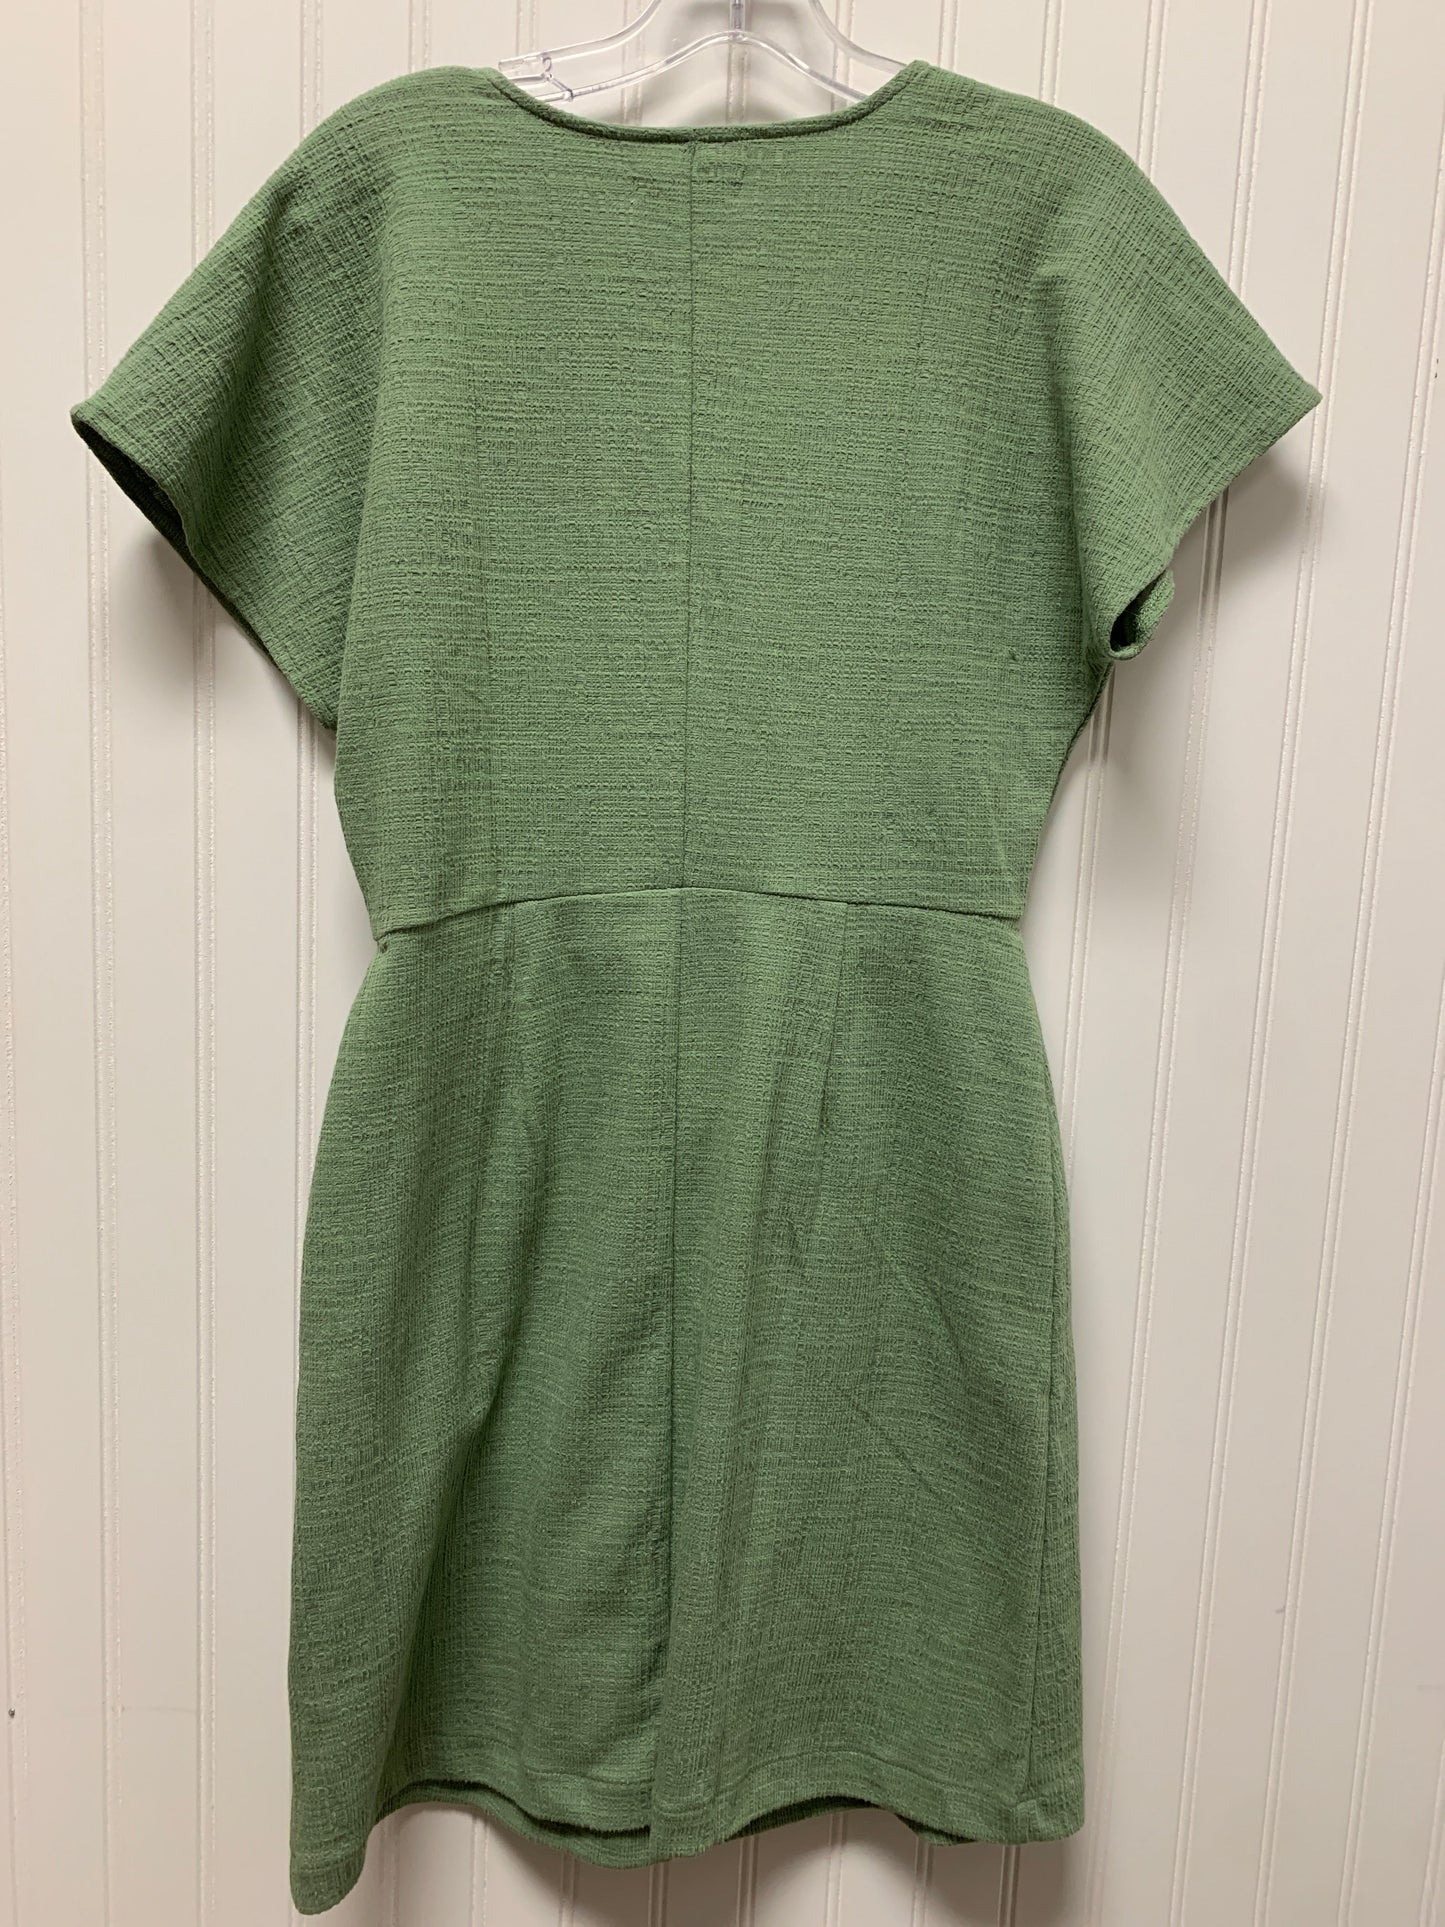 Green Dress Casual Short Madewell, Size S